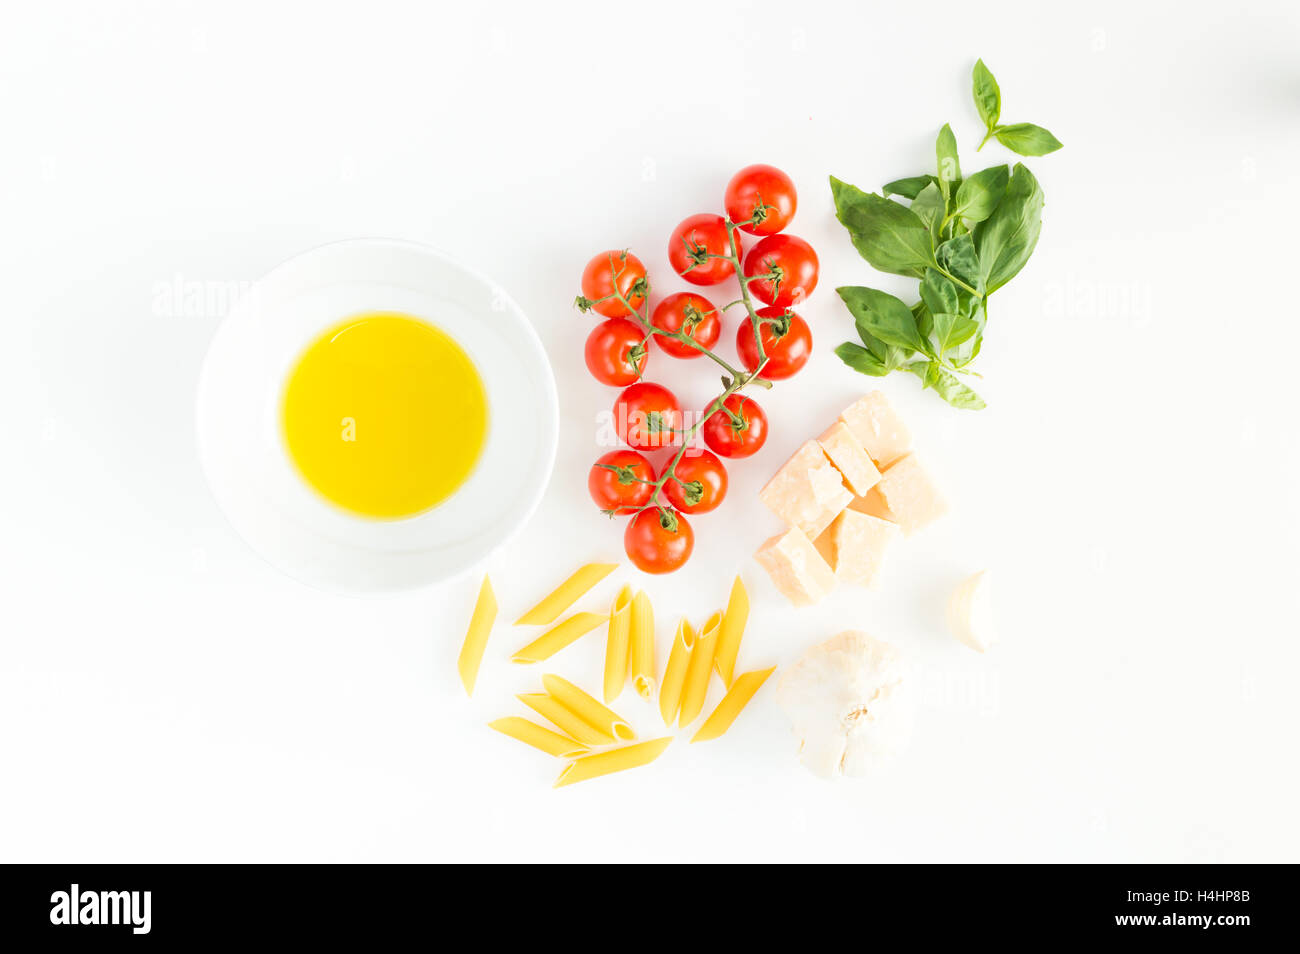 Italian red tomatoes close up food with pasta, basil leafs, cheese, isolated on white background - Flat lay Stock Photo